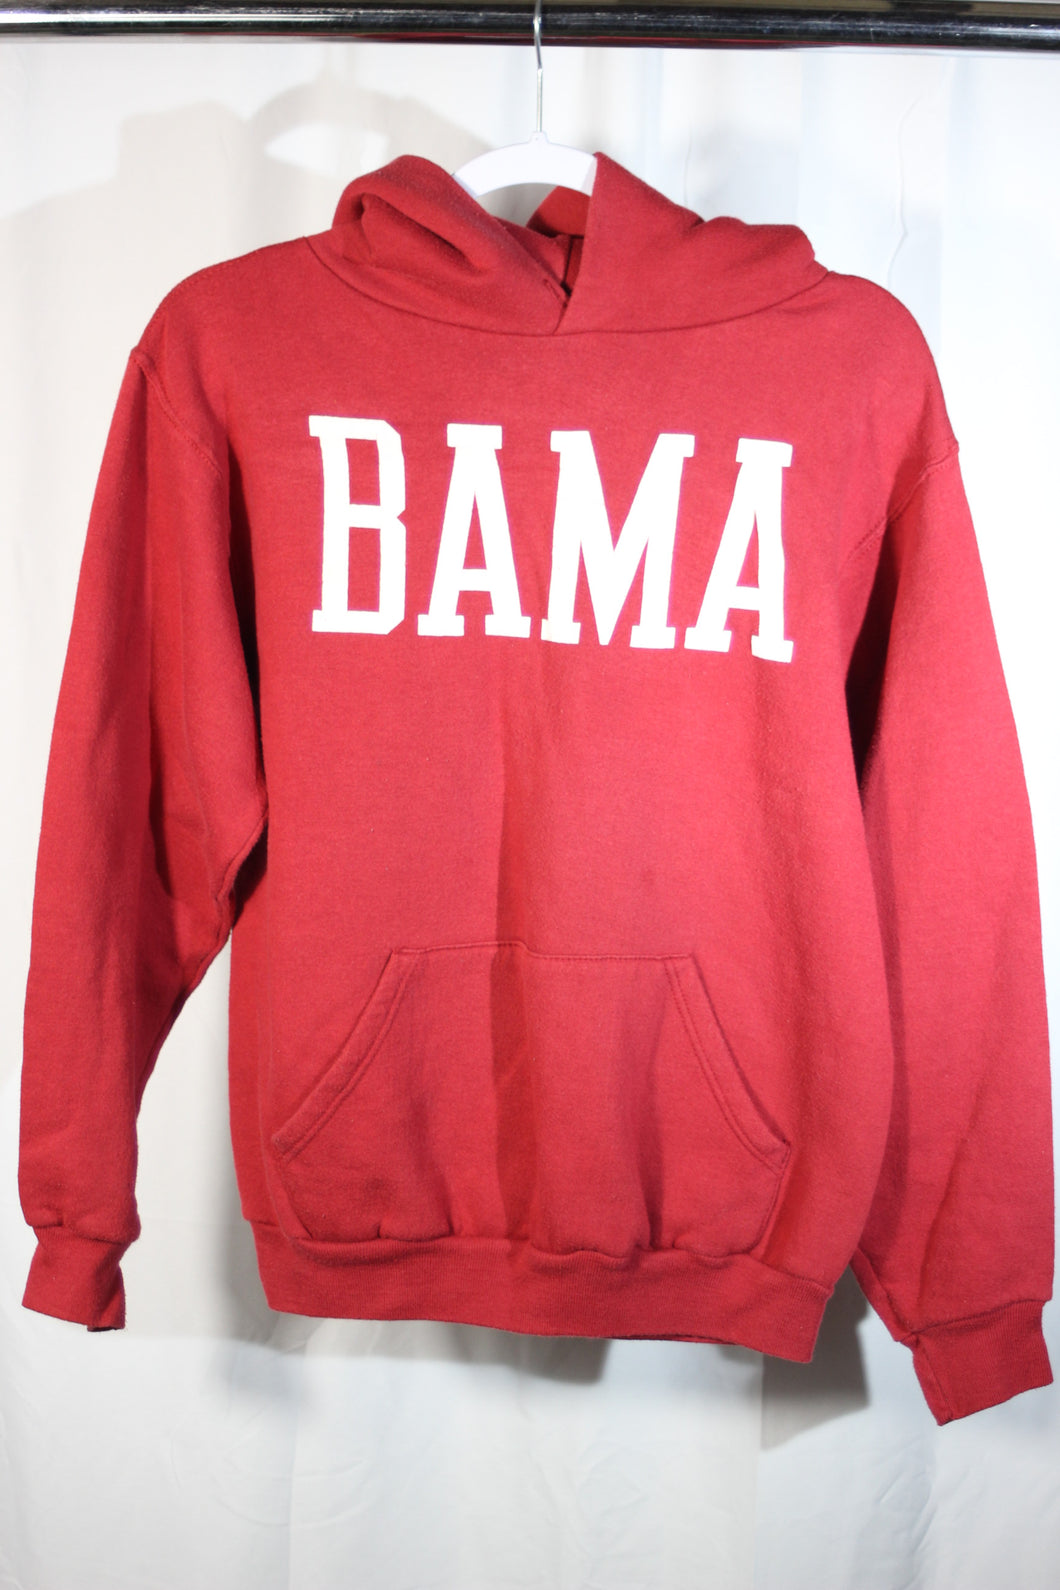 Vintage Bama Spellout Hoodie Small